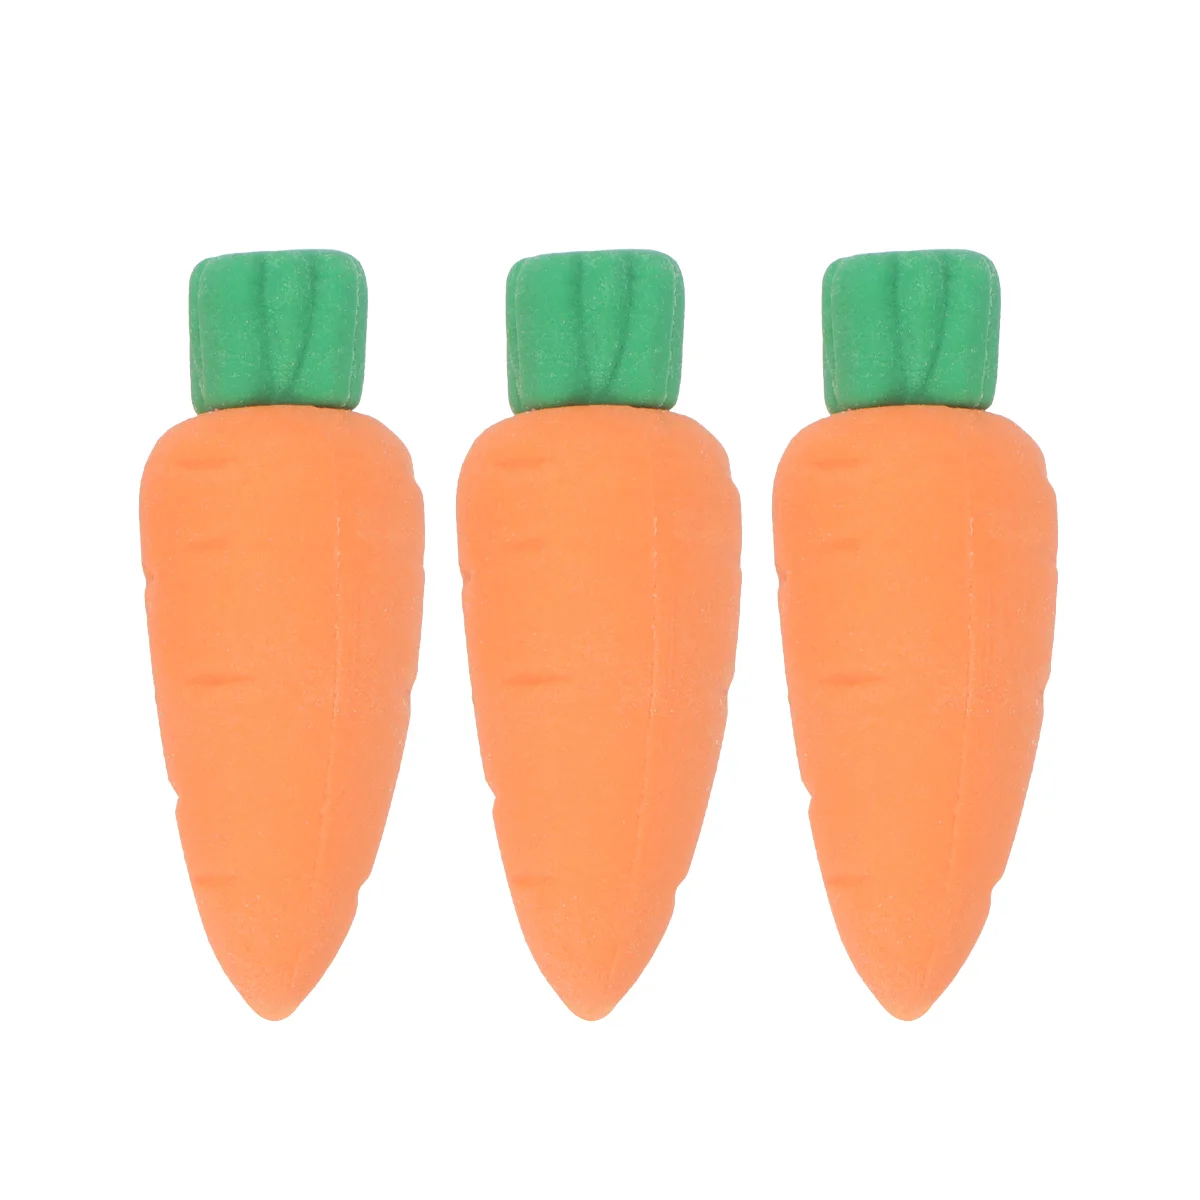 

Carrots Erasers for Kids, Miniature Erasers, 30pcs Tiny Toys Fruits Stationery for Classroom Rewards Party Favors